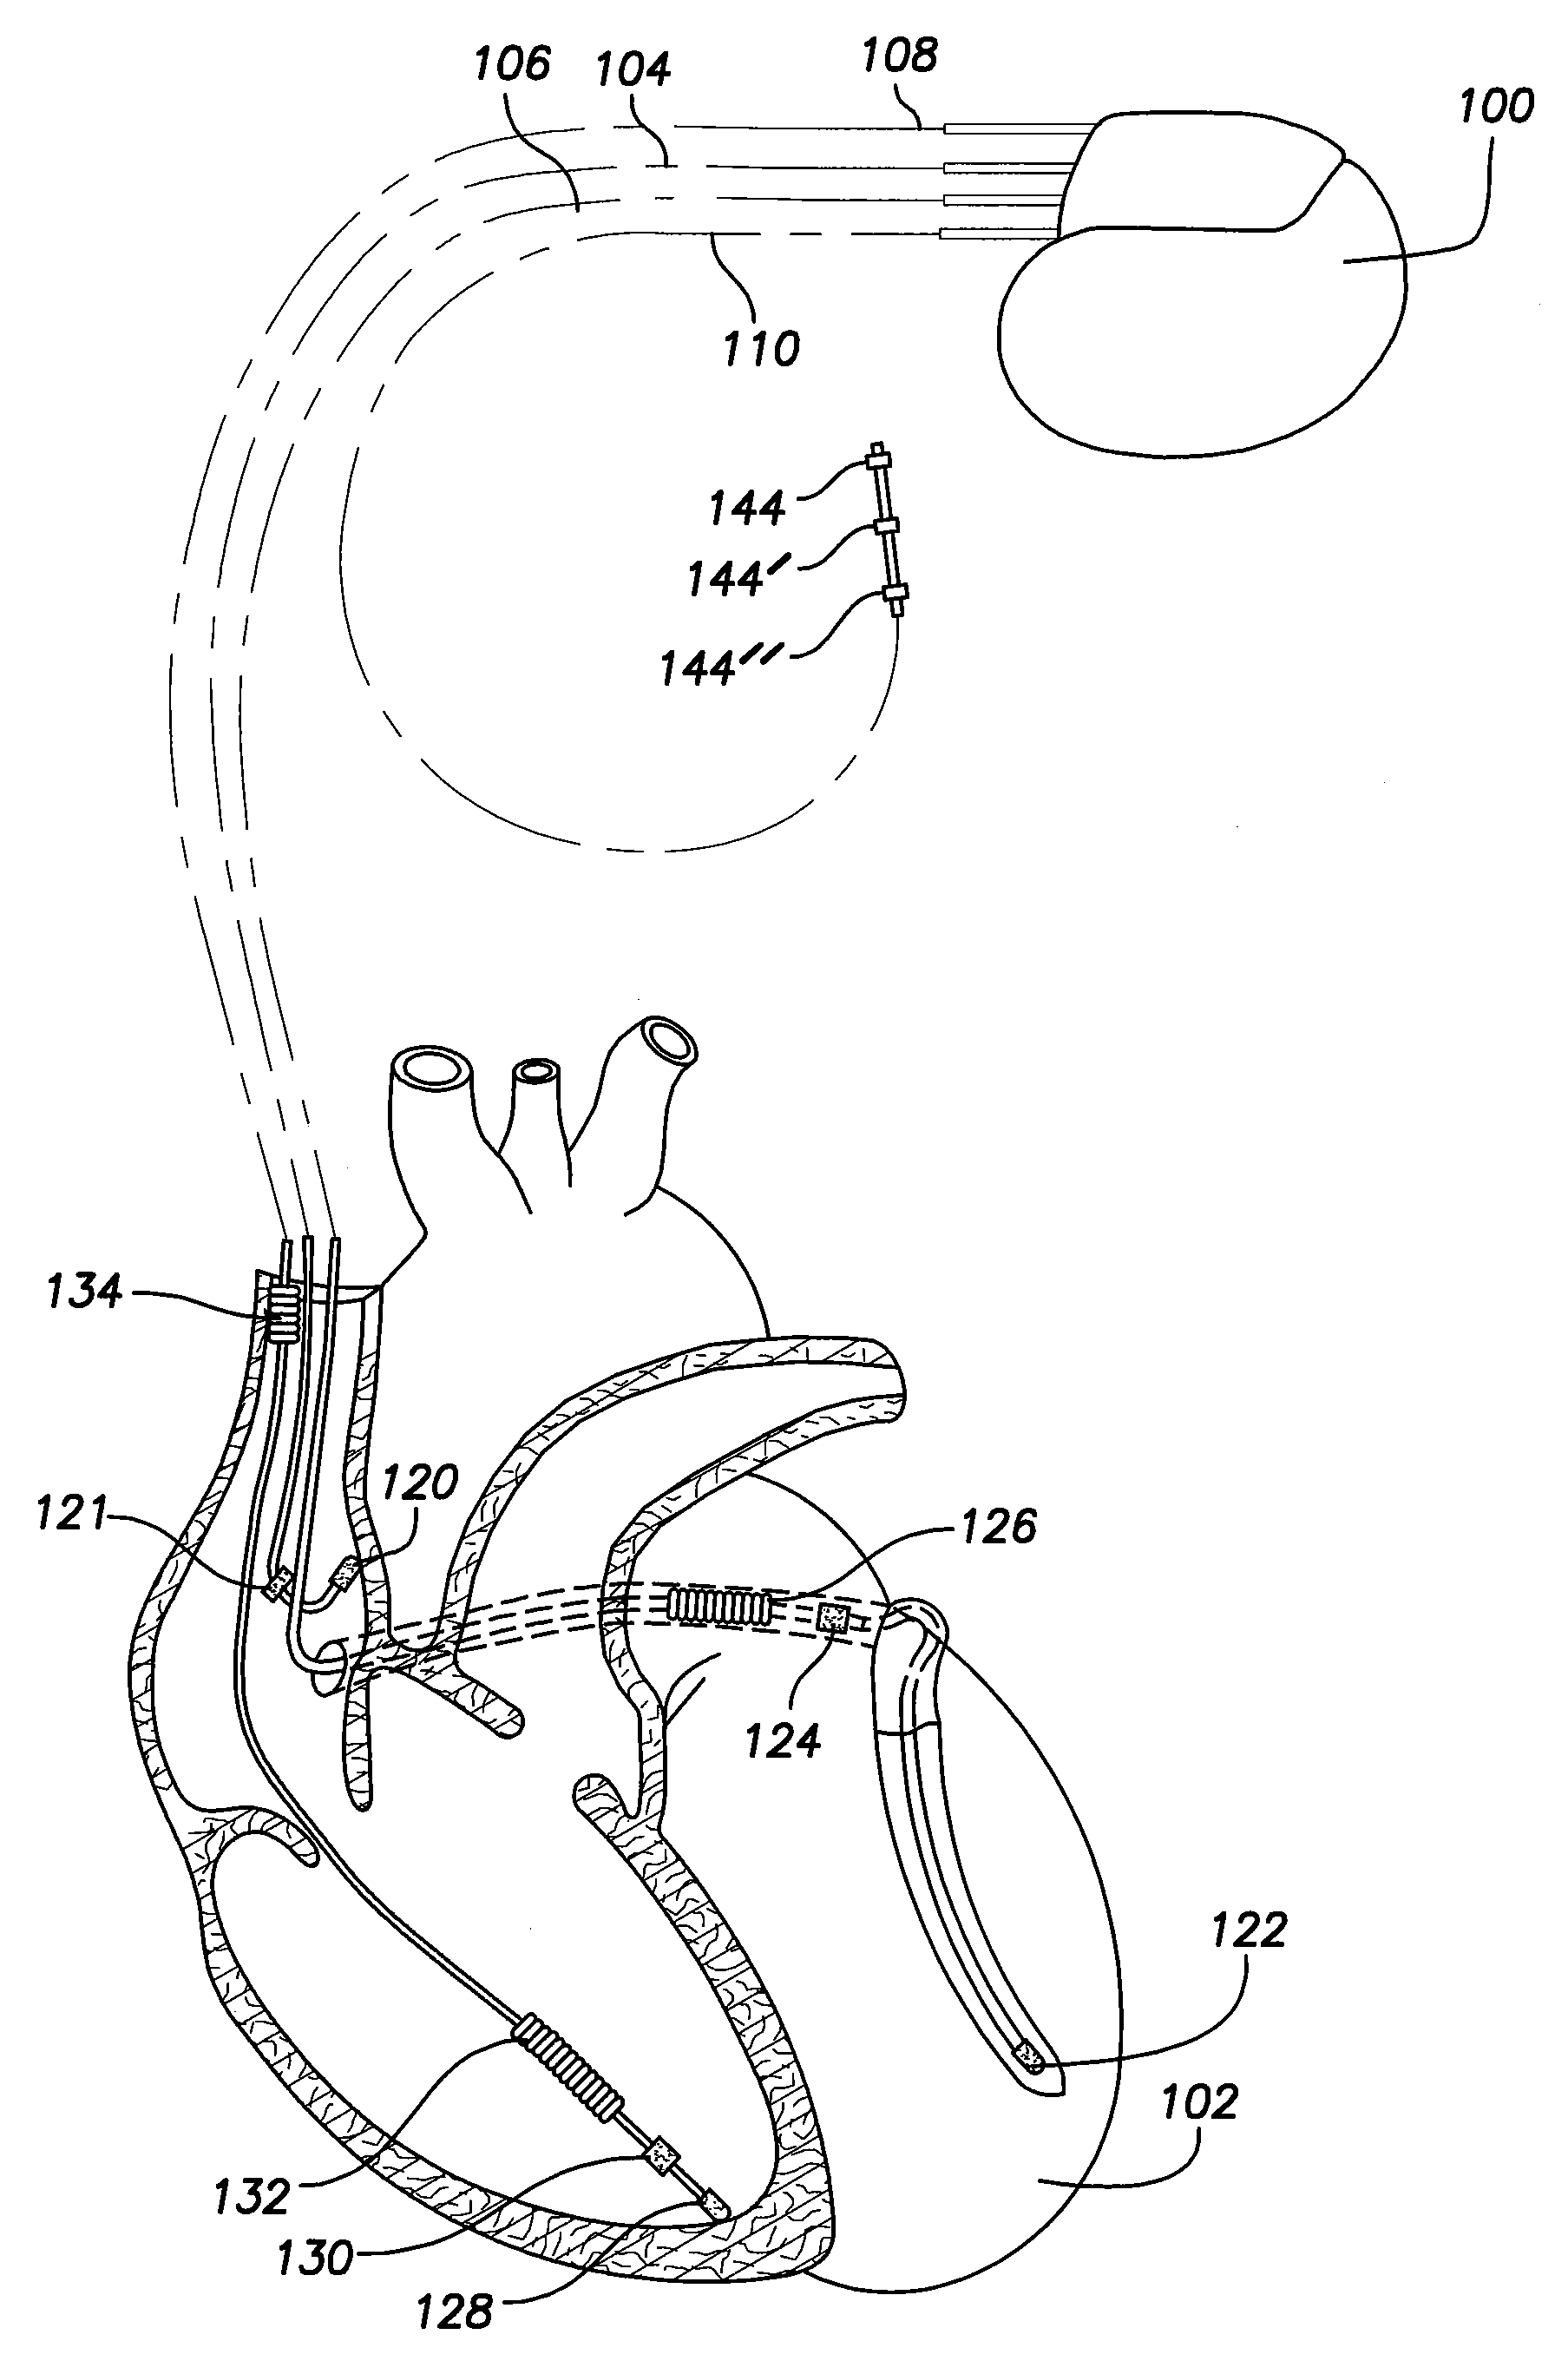 Systems and Methods for Controlling Ventricular Pacing in Patients with Long Inter-Atrial Conduction Delays